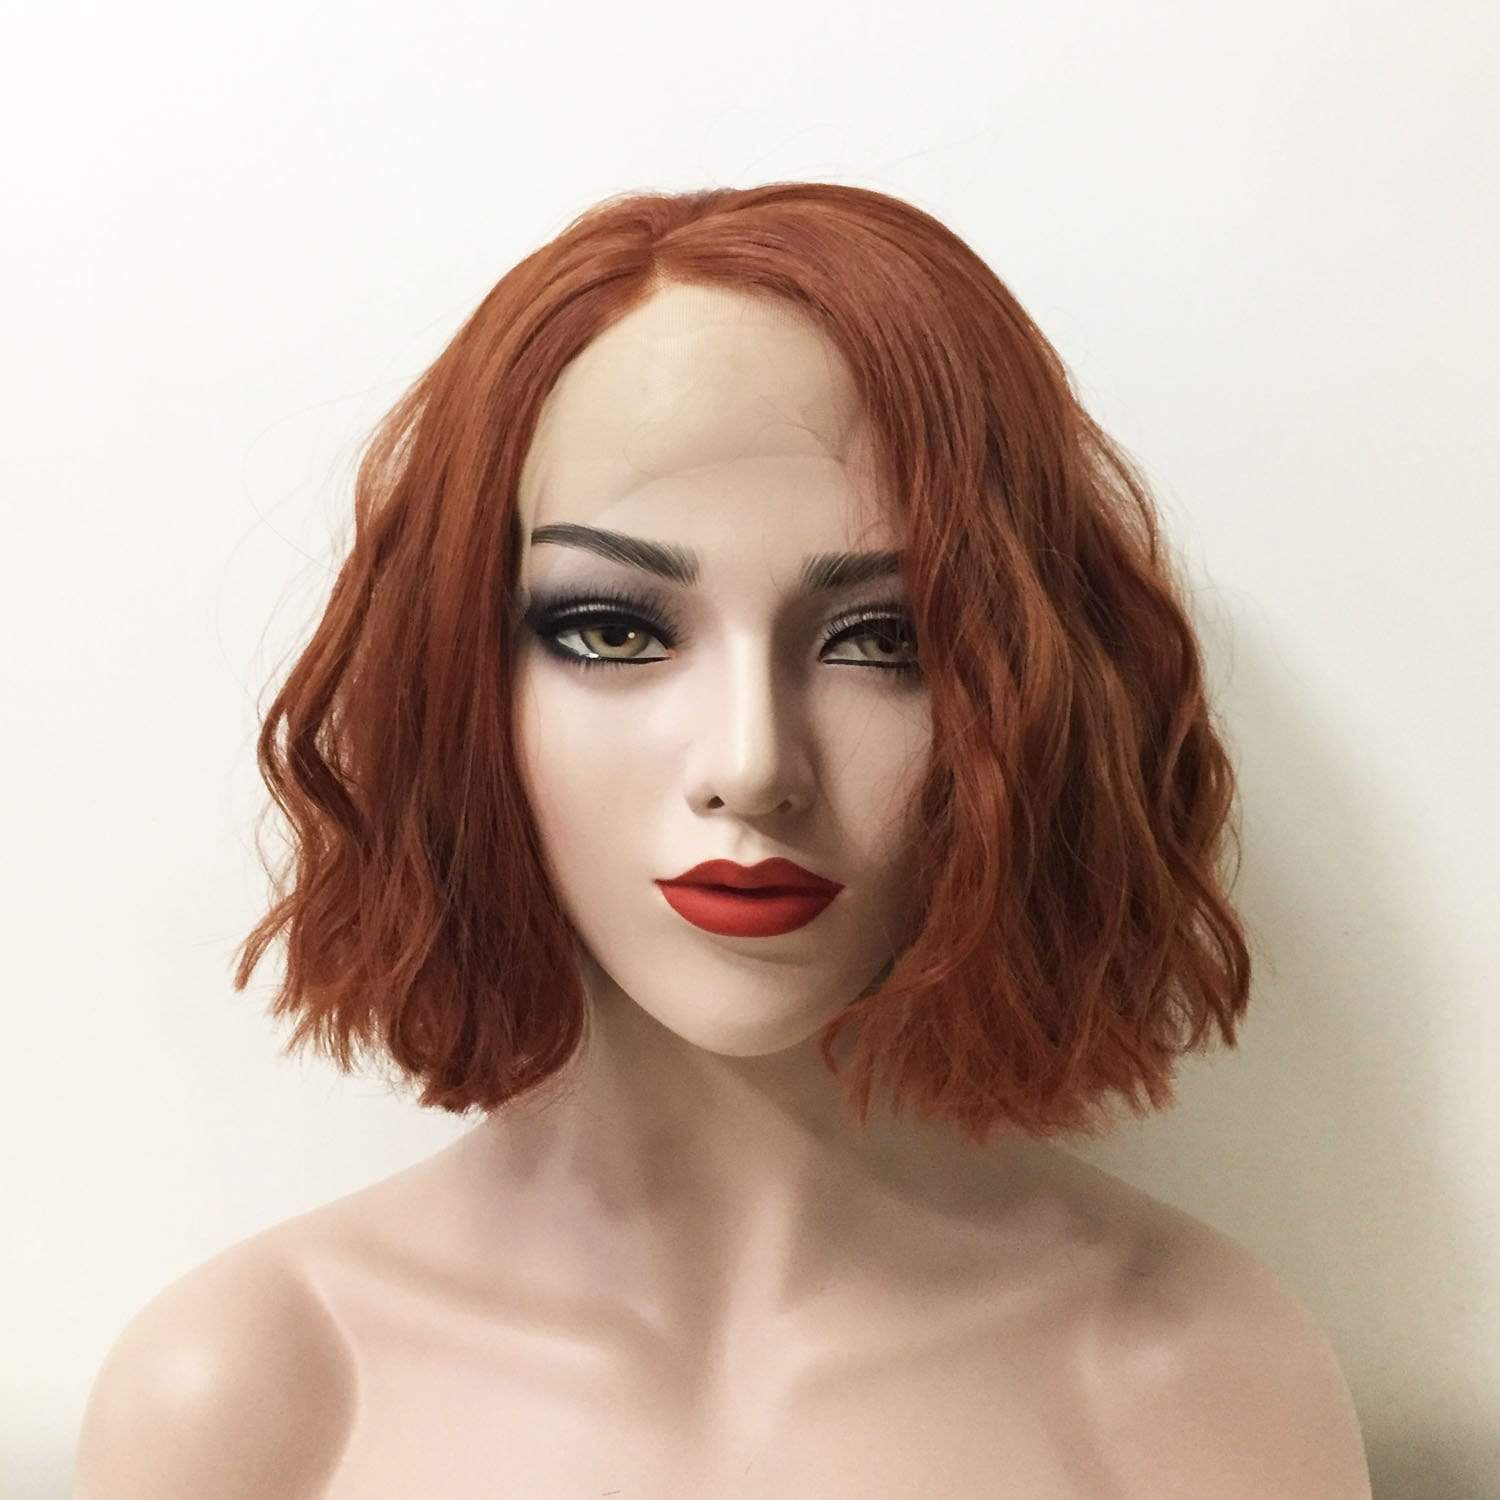 nevermindyrhead Women Lace Front Side Part Auburn Brown Short Curly Wig